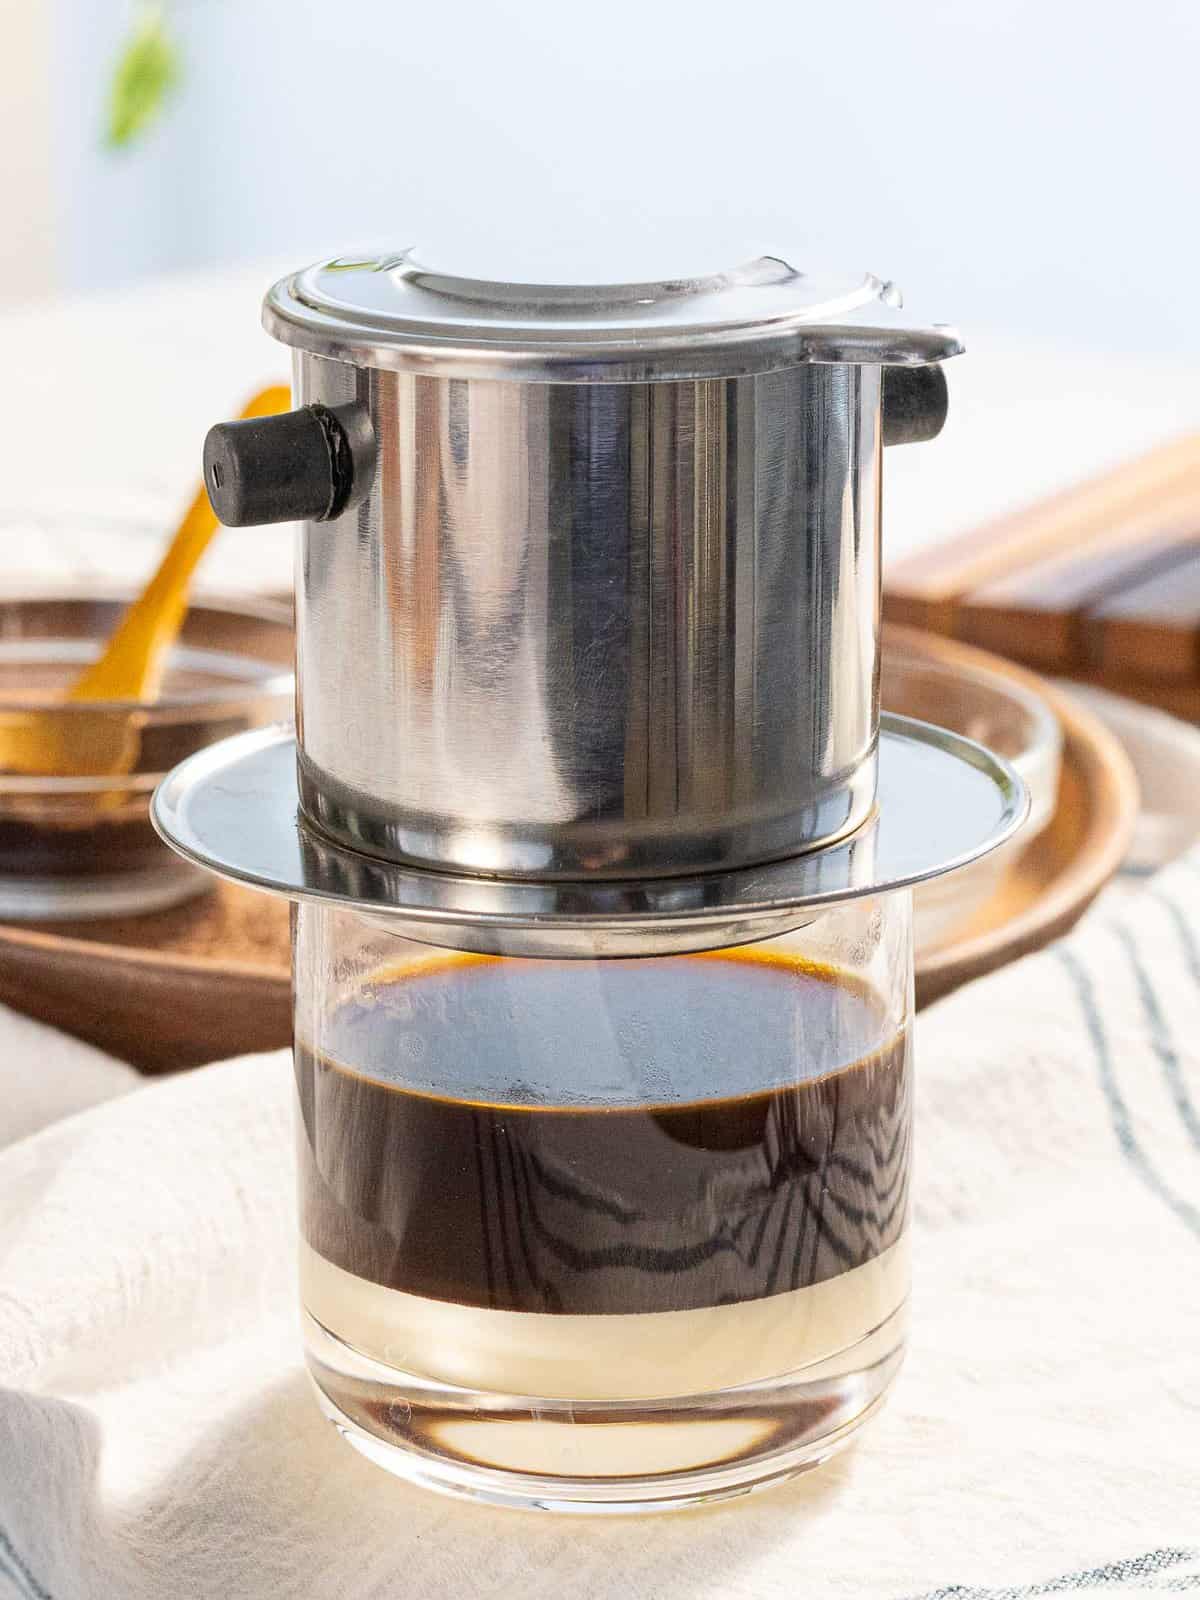 Vietnamese coffee is slowly brewed with a phin filter.